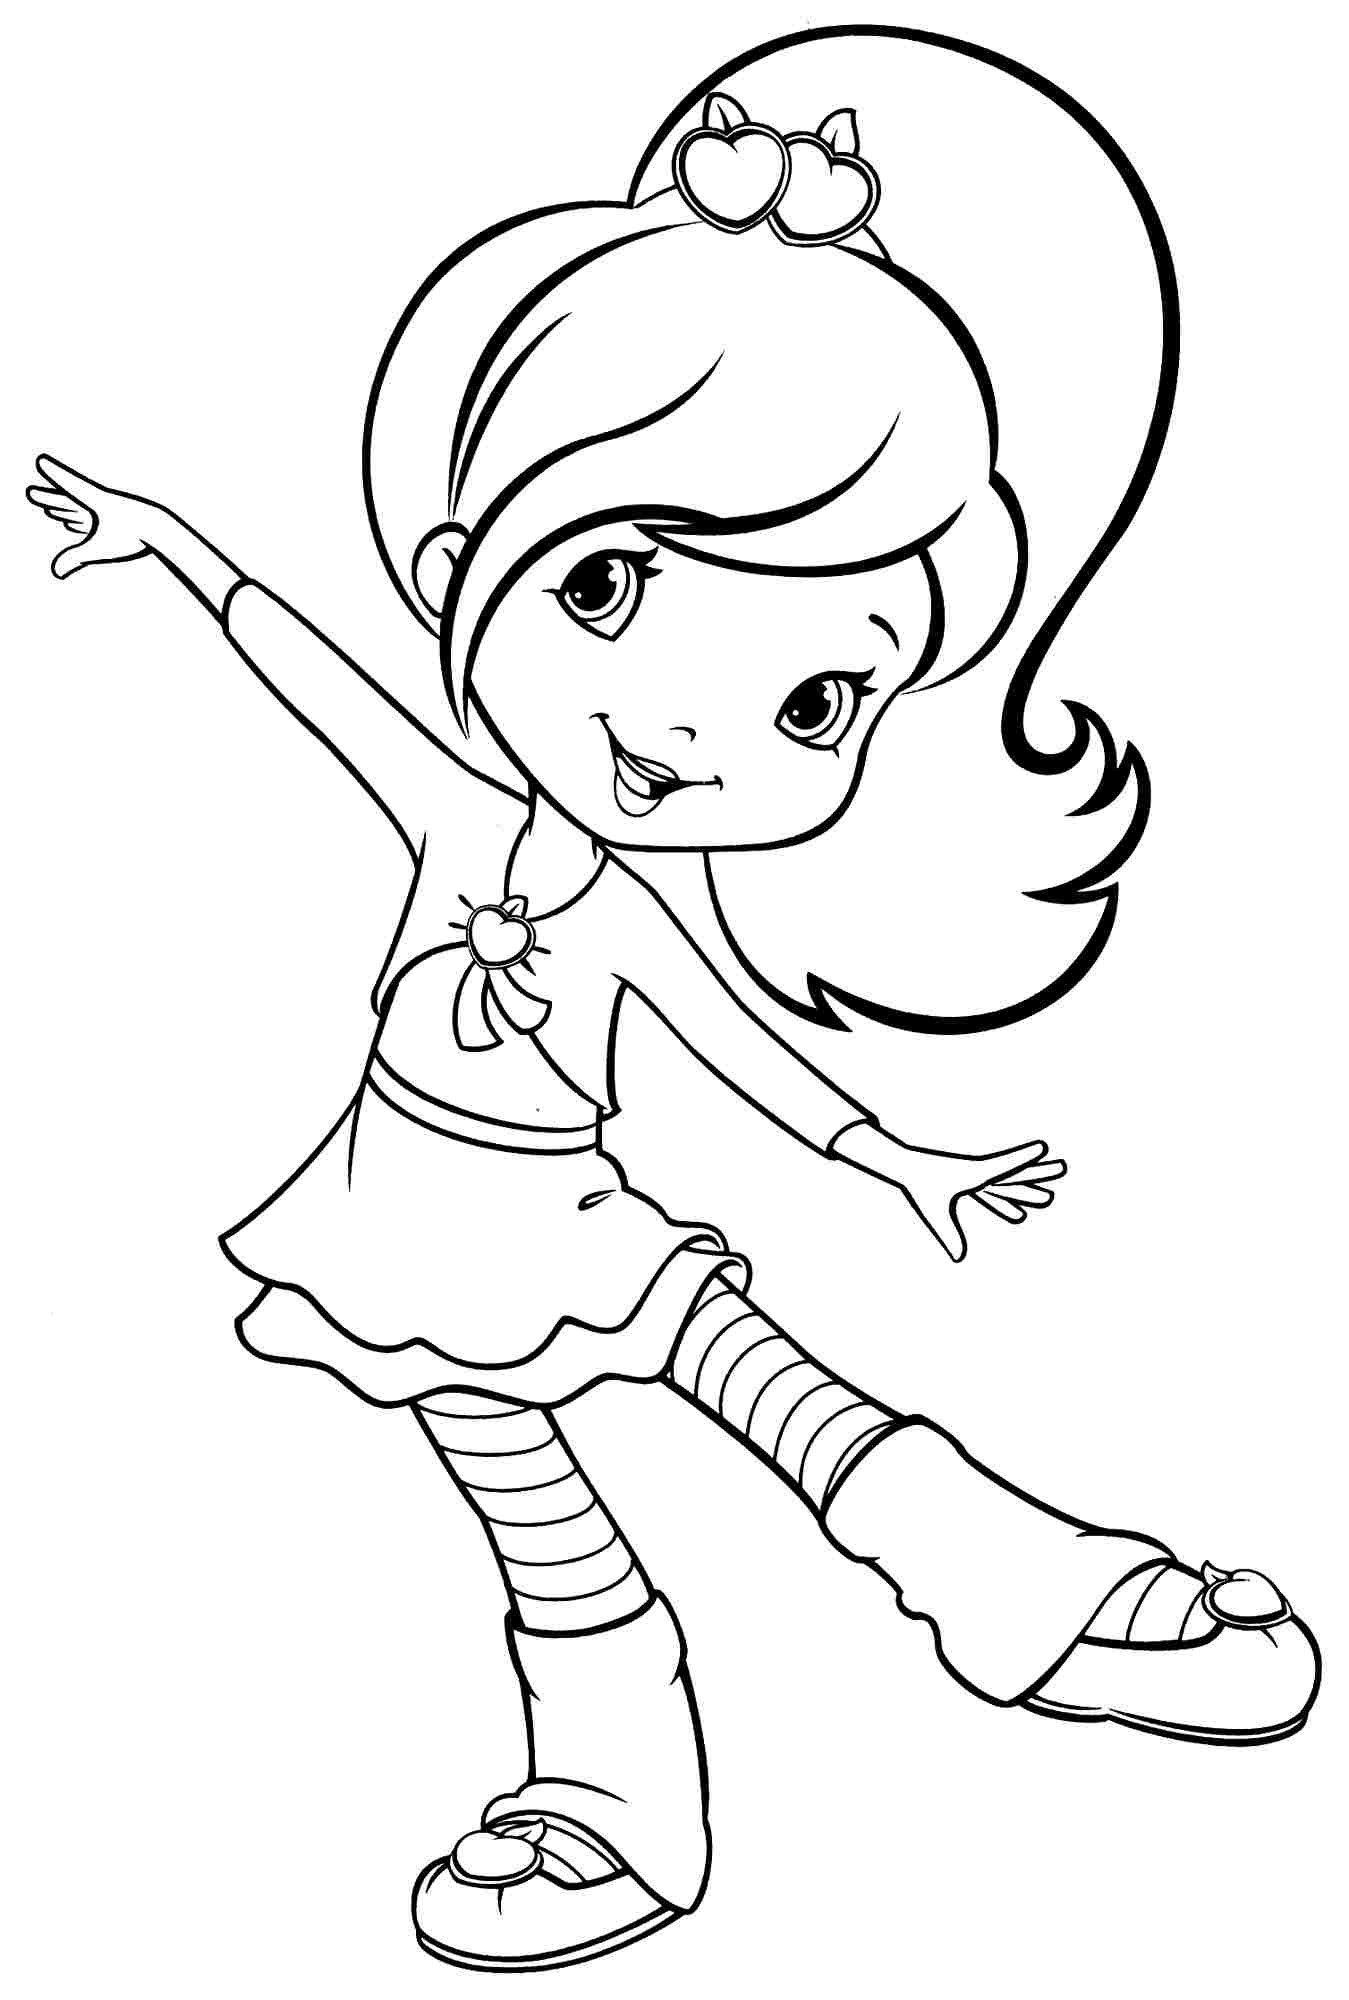 Coloring Sheets For Girls Free Printable
 Coloring Pages for Girls Best Coloring Pages For Kids